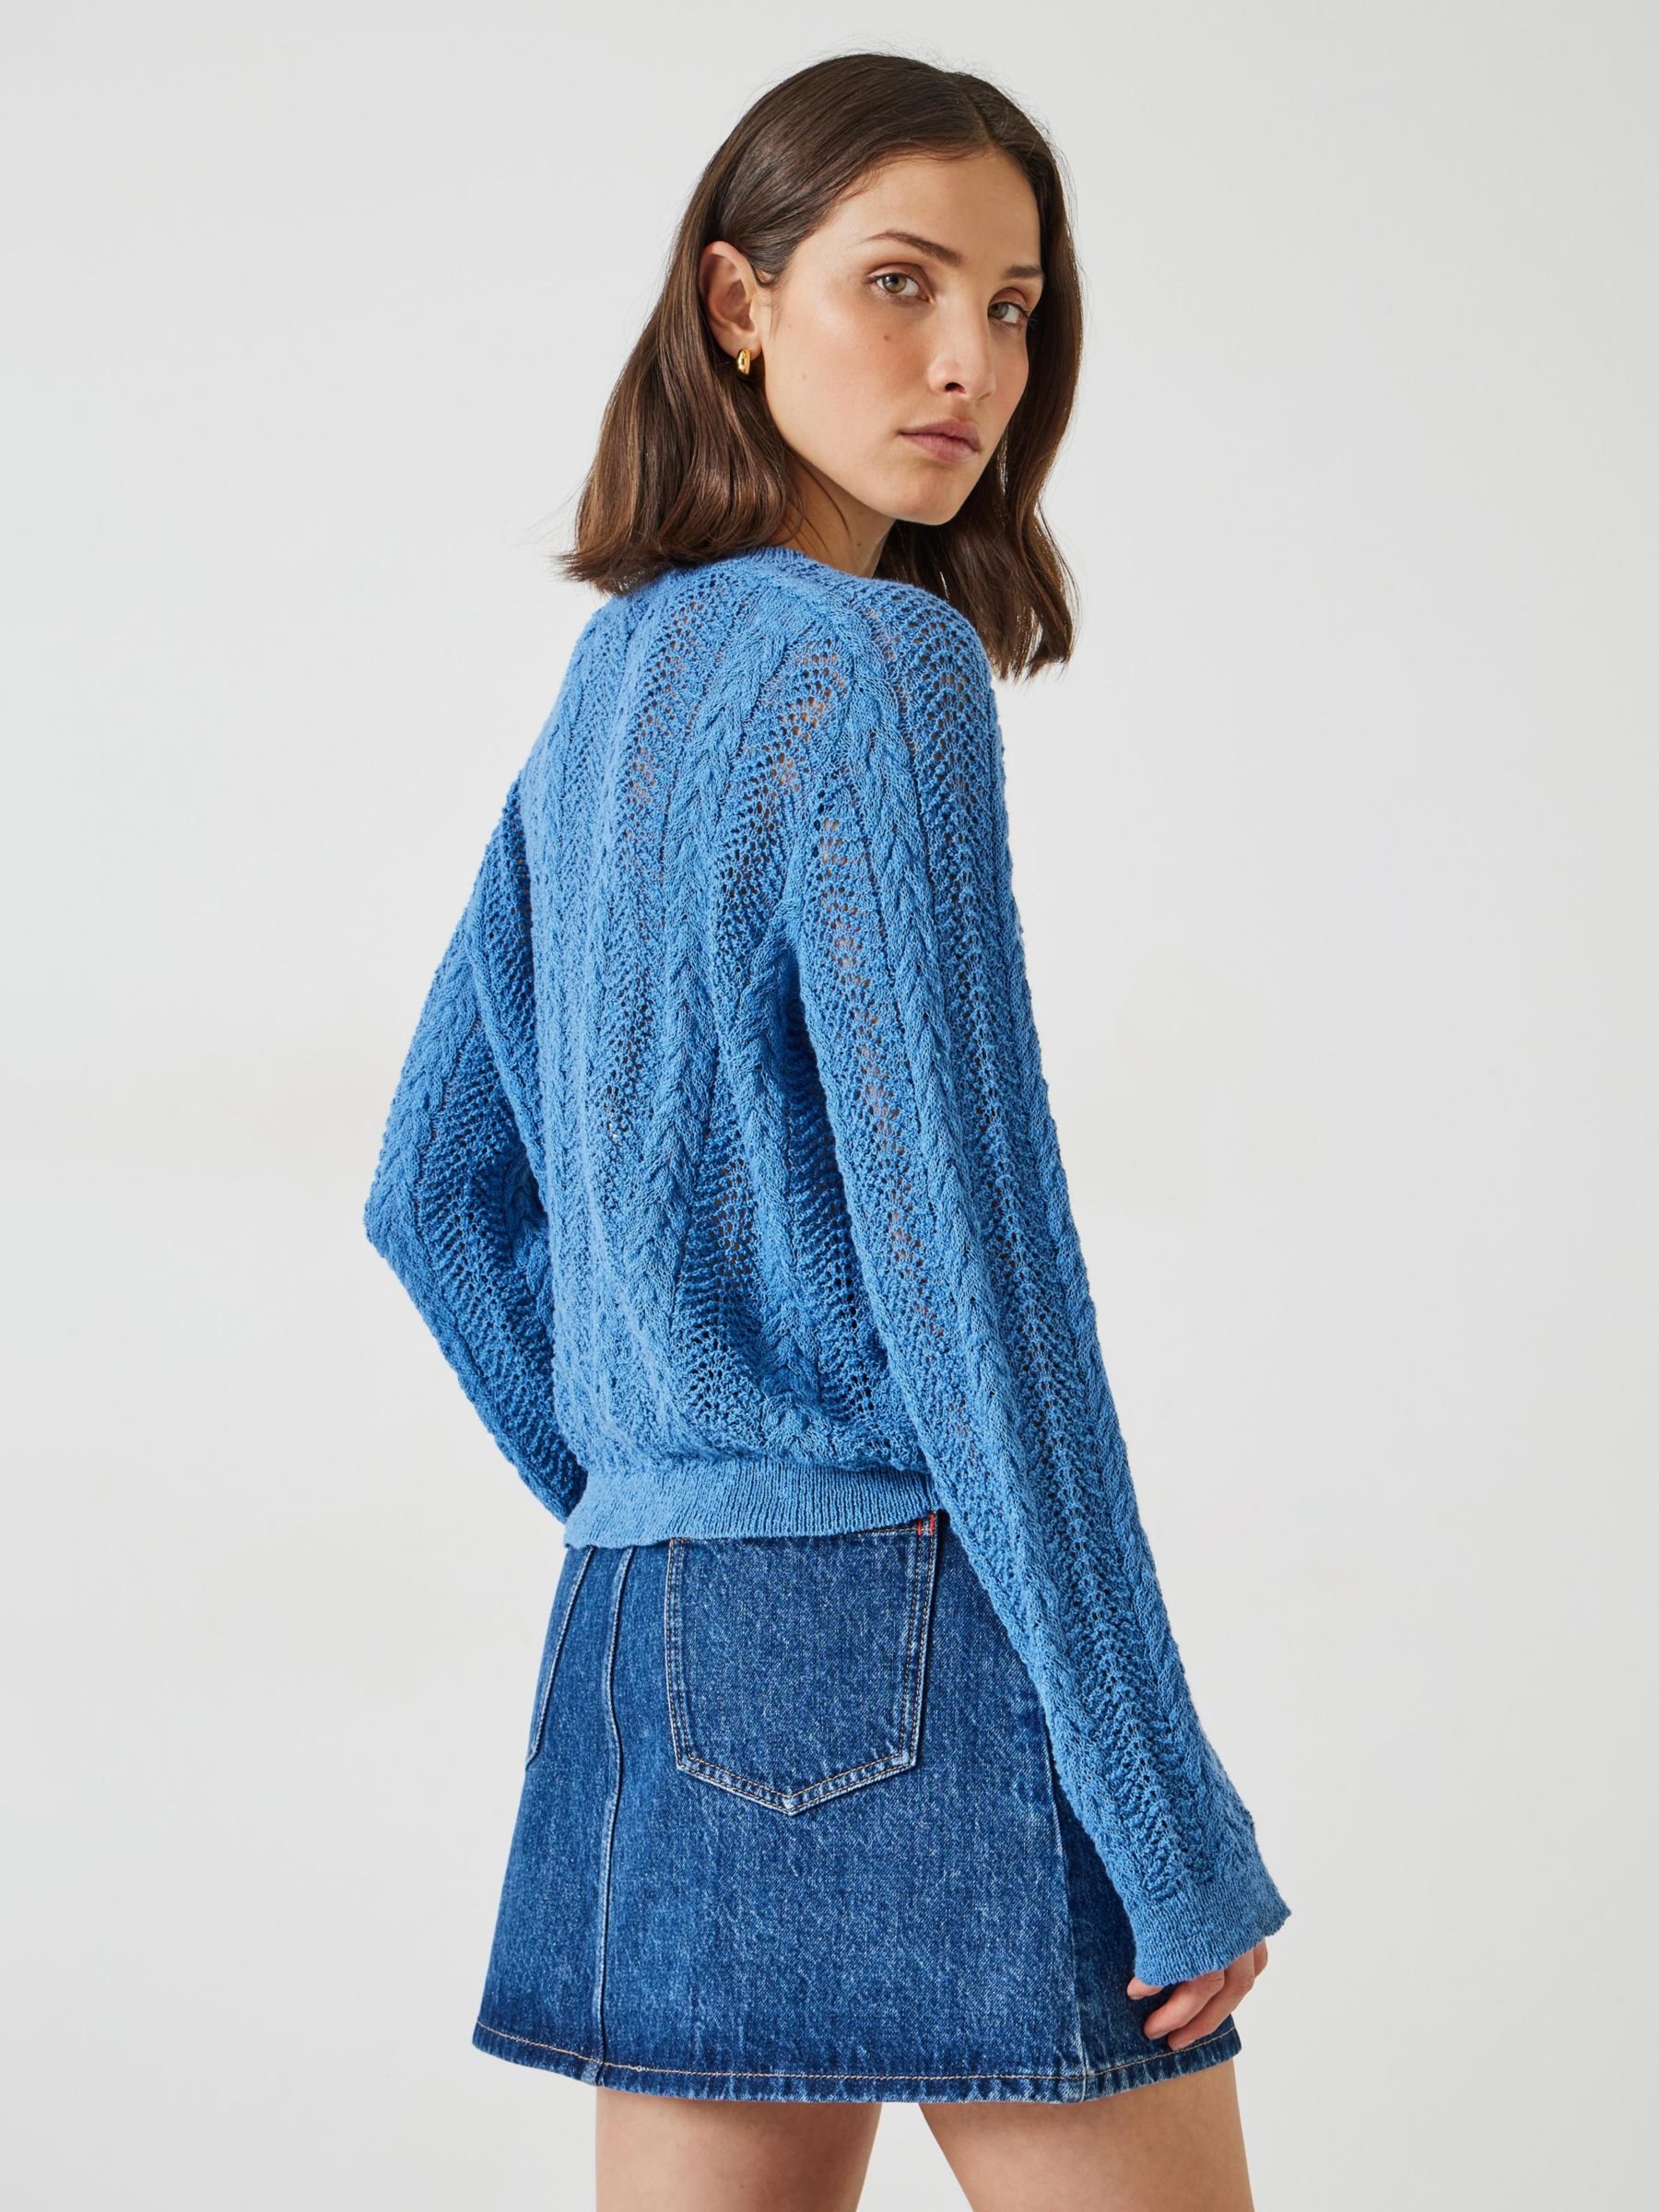 Buy HUSH Dot Open Stitch Cable Crew Jumper, Blue Online at johnlewis.com